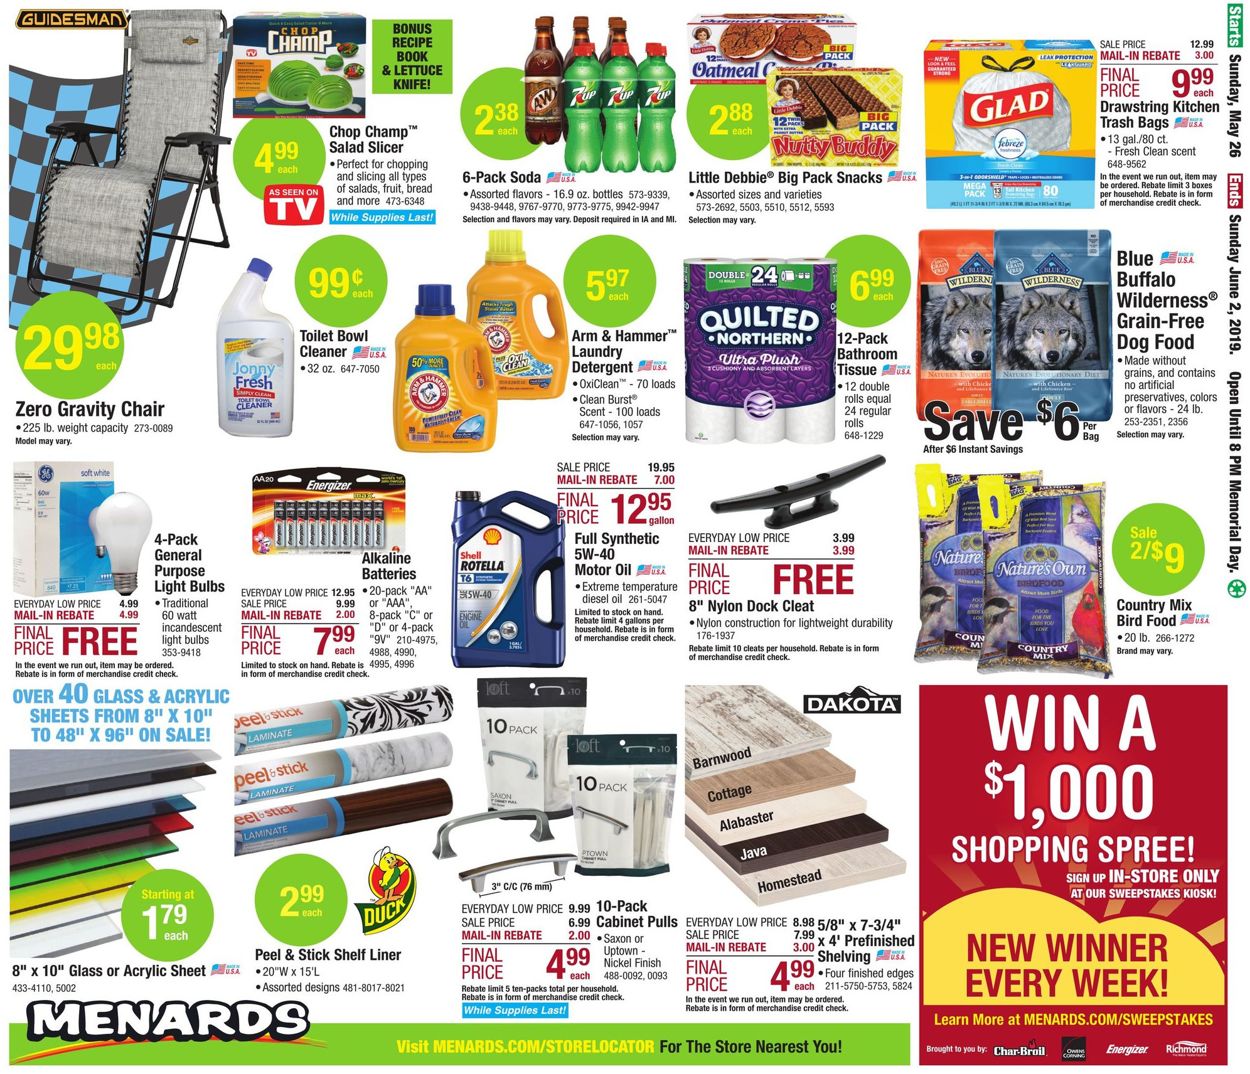 Menards Current weekly ad 05/26 - 06/02/2019 [36] - 0